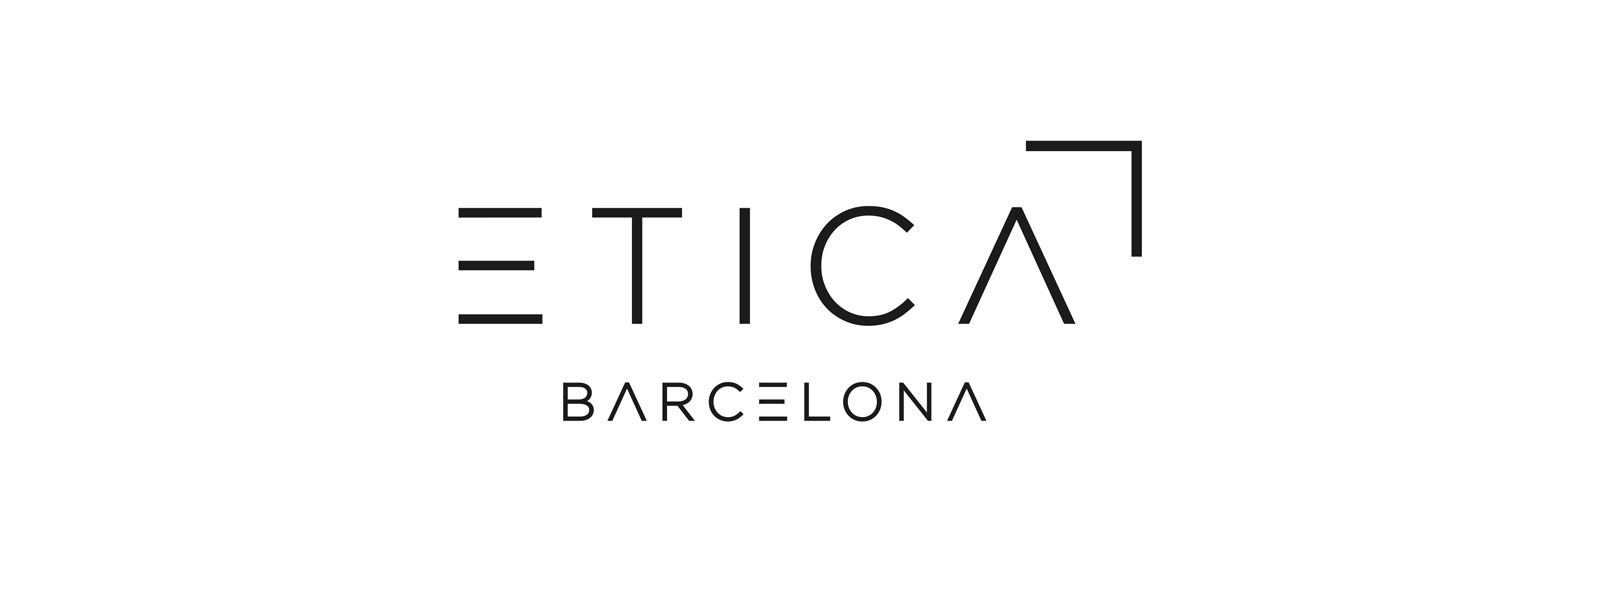 Graphic and creative design of logo restyling and branding for a real state company ETICA BARCELONA